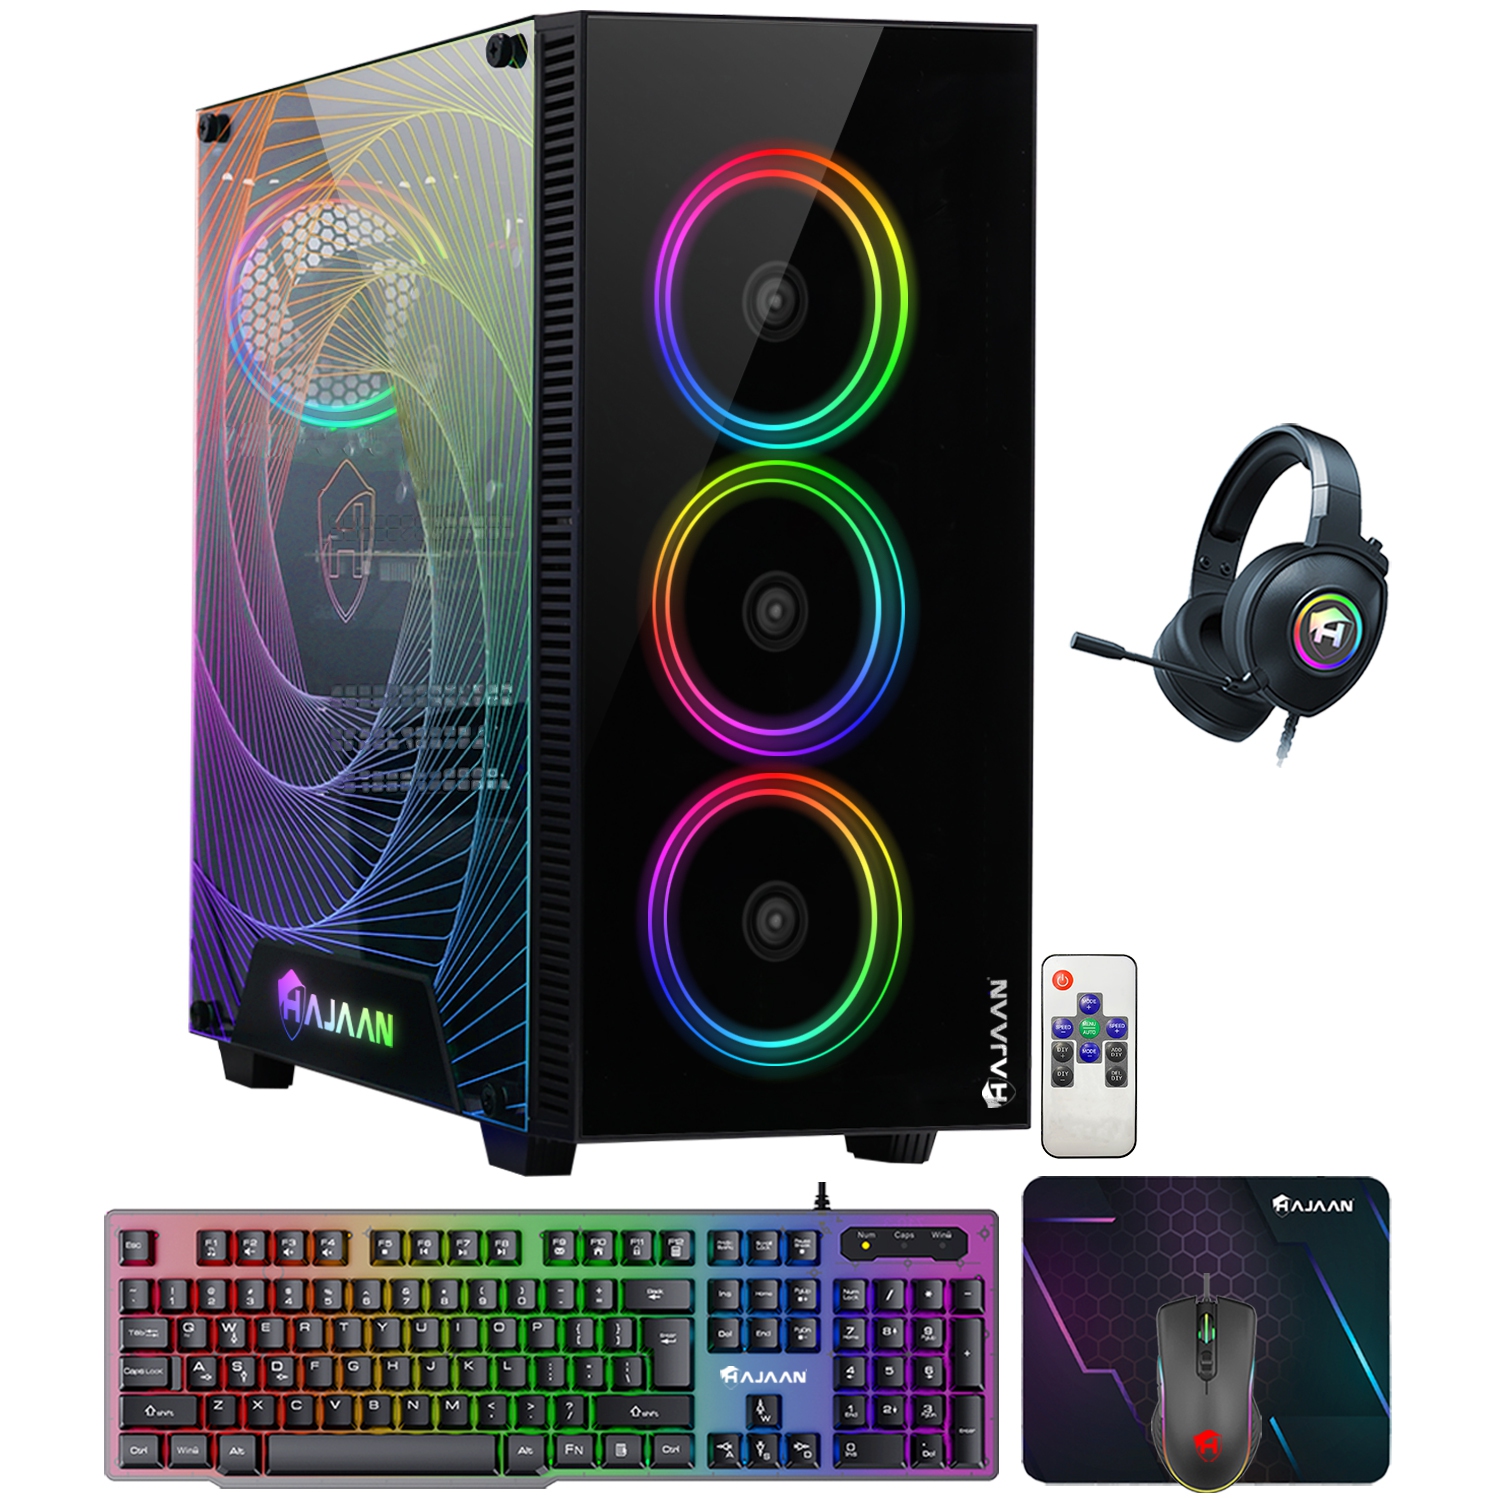 HAJAAN CYCLONIA Gaming Tower Computer Desktop PC - AMD Ryzen 7 5700G Processor Up to 4.6GHz - RTX 4060 8G GDDR6 - 32GB DDR4 - 1TB SSD - Windows 11 Pro - Keyboard Mouse and Headset